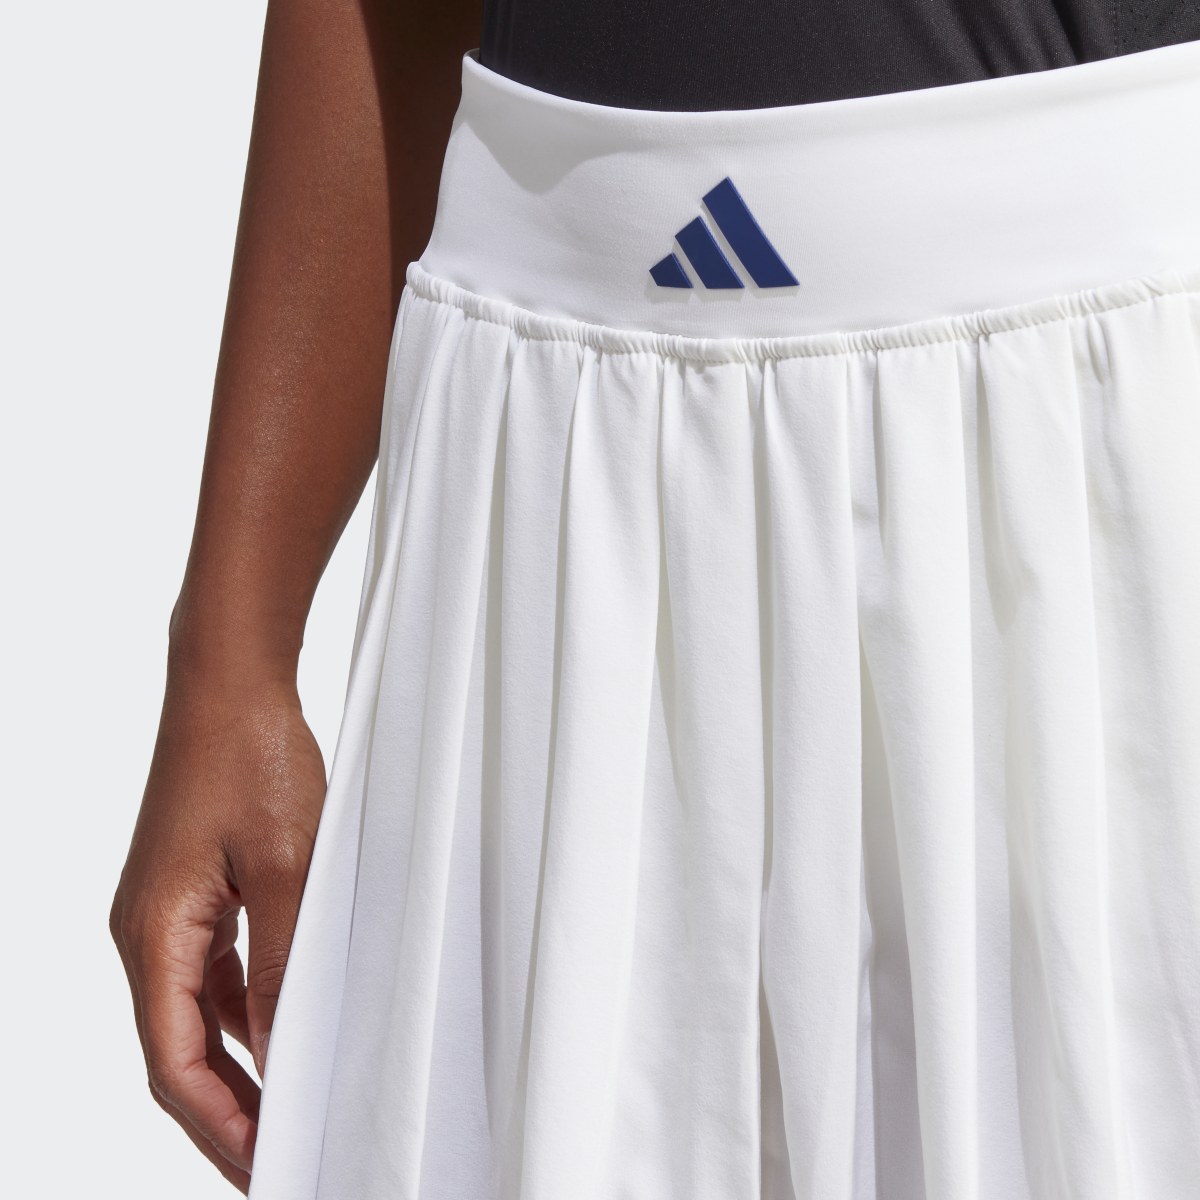 Adidas Clubhouse Premium Classic Tennis Pleated Skirt. 5